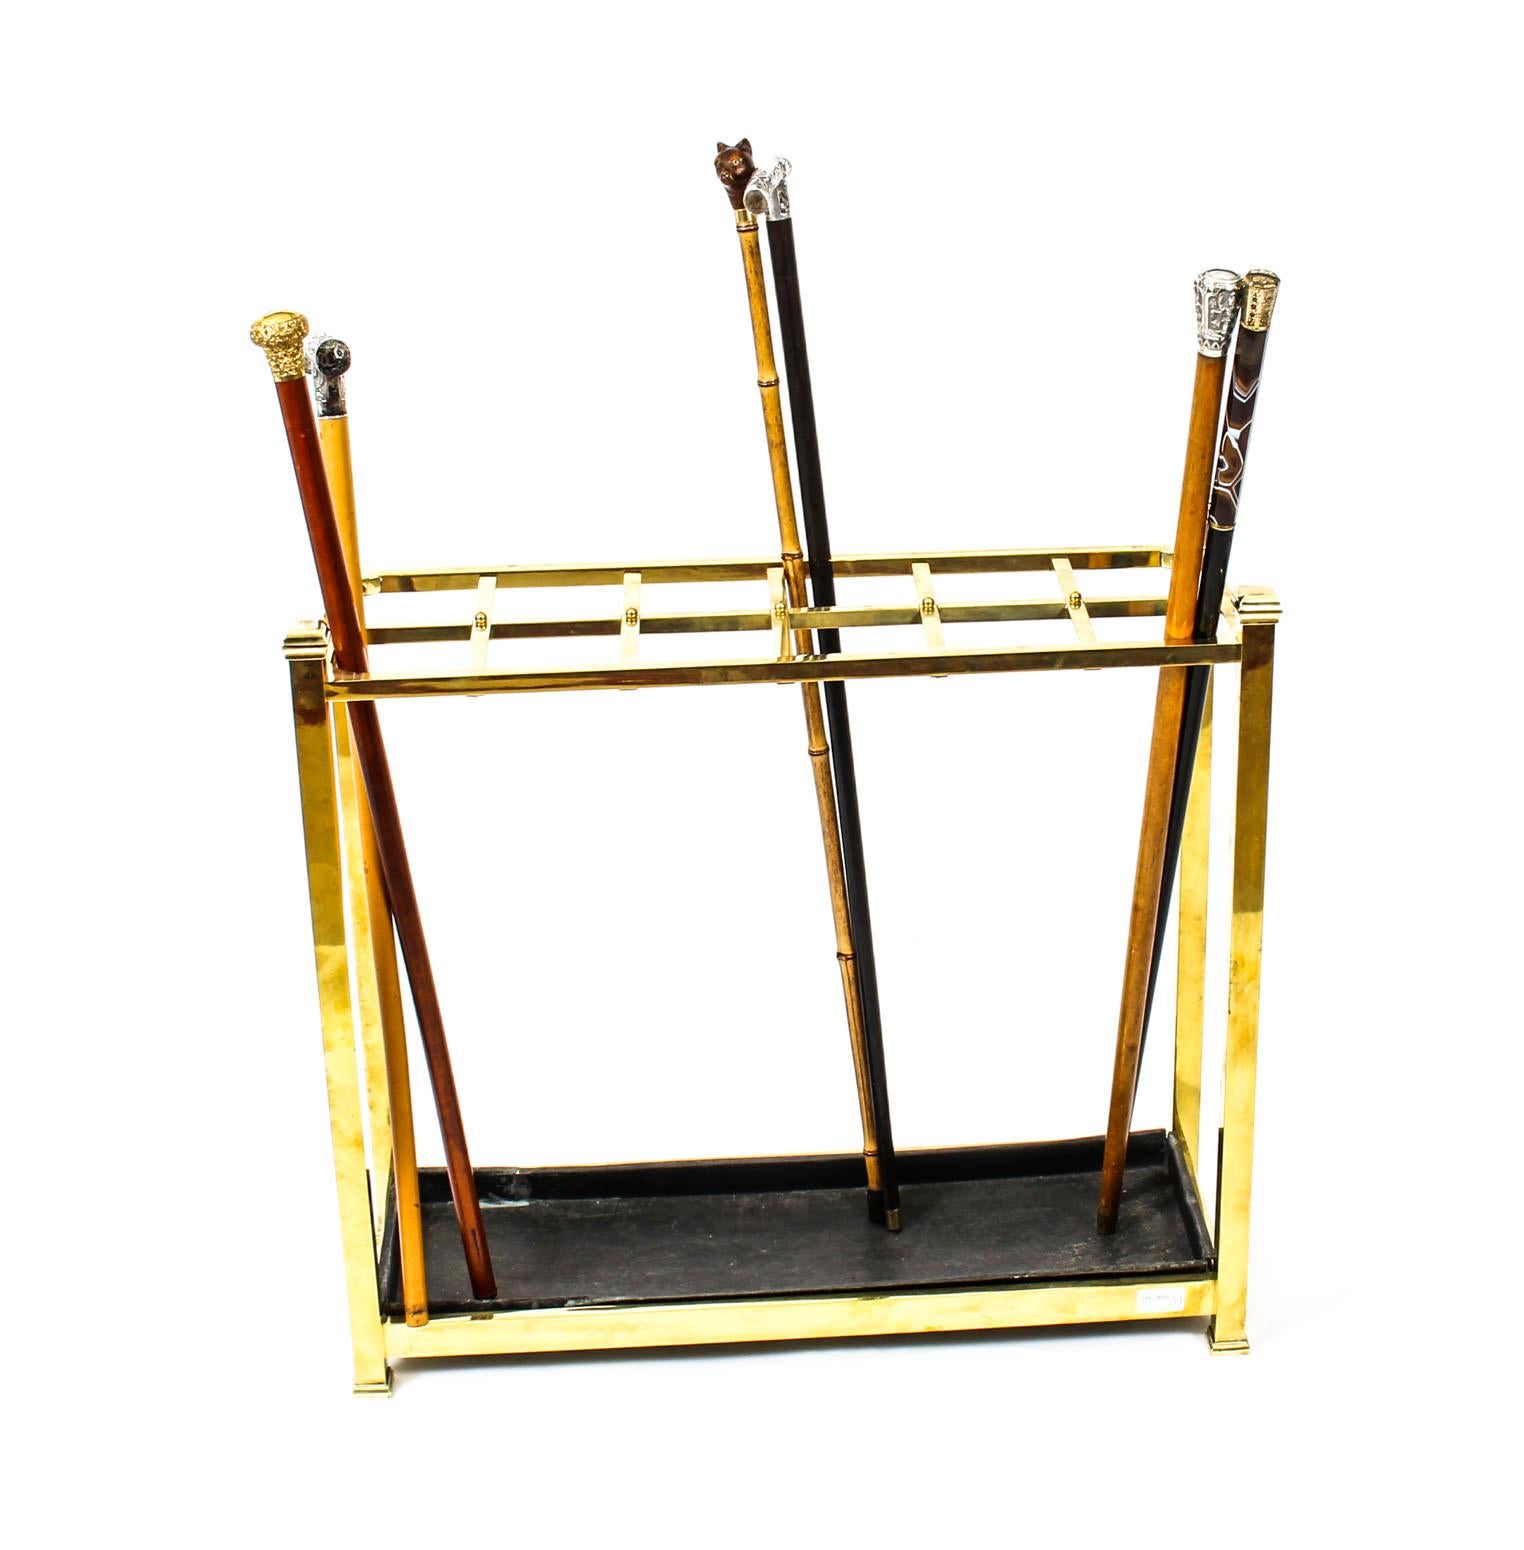 This is a very elegant brass umbrella and walking stick stand, dating from the late 19th century. 

This stunning stand is of rectangular shape with four stylish square corner finials and twelve divisions to display your walking sticks neatly.